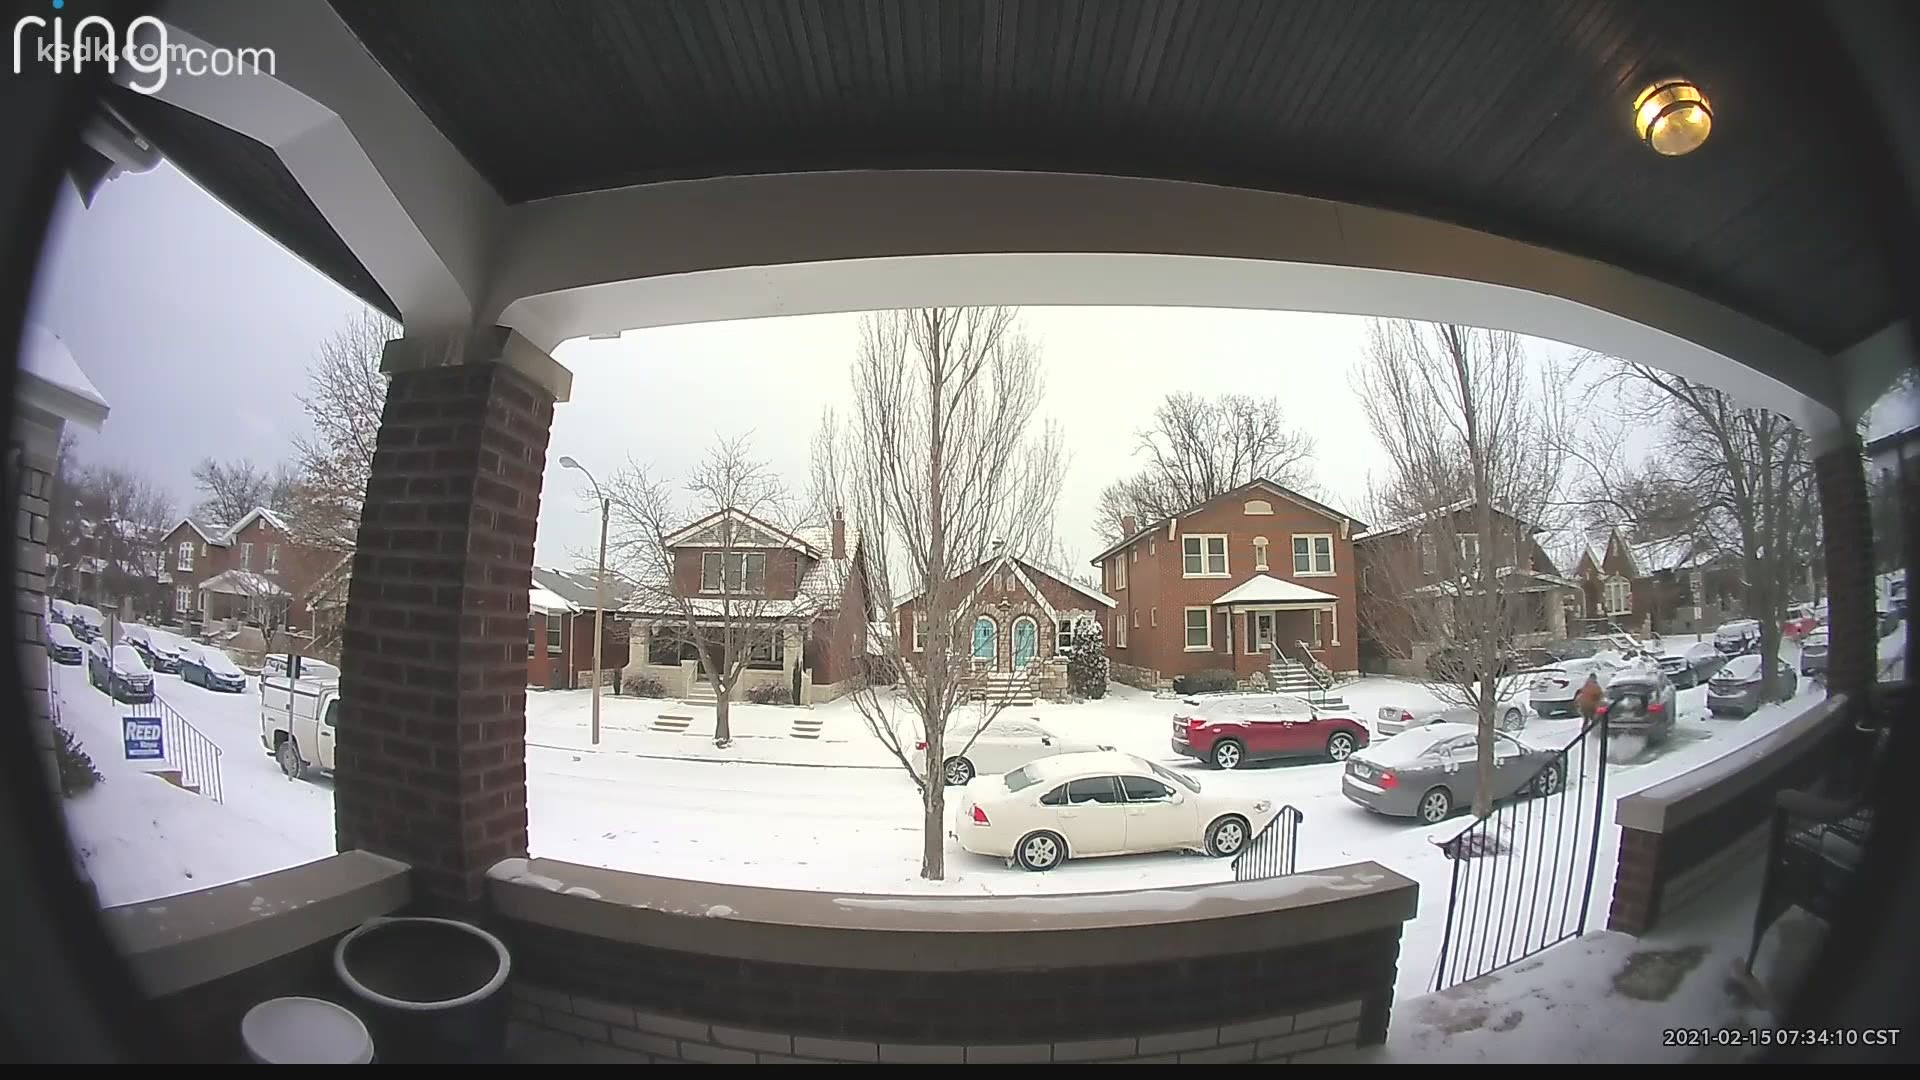 Surveillance video shows three thieves stealing a car left running to warm-up in single digit temperatures